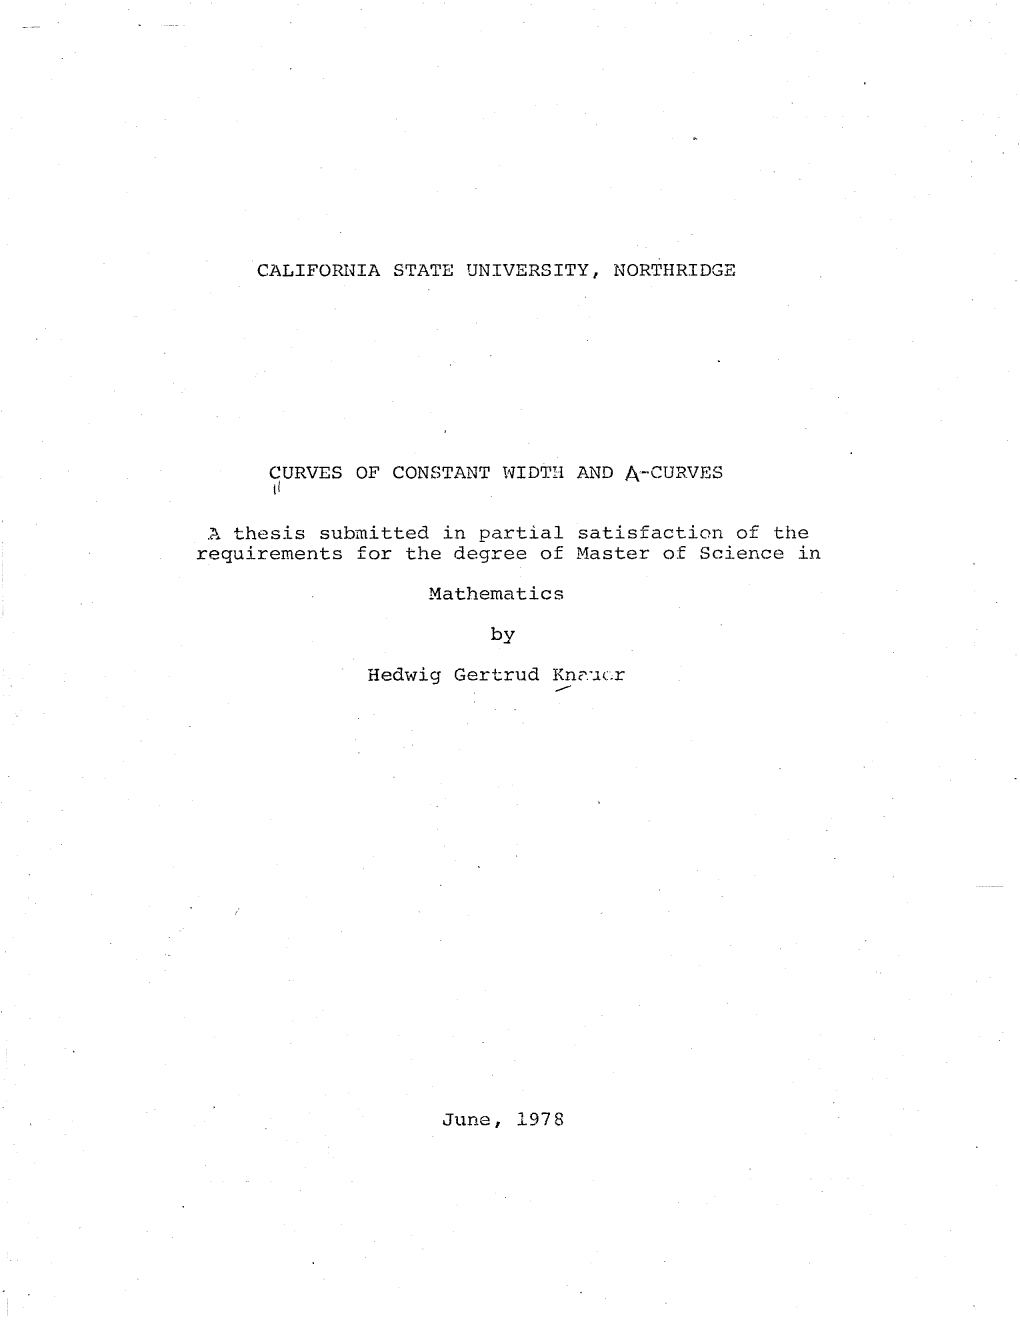 June, 1978 the Thesis of Hedwig Gertrud Knauer Is Approved